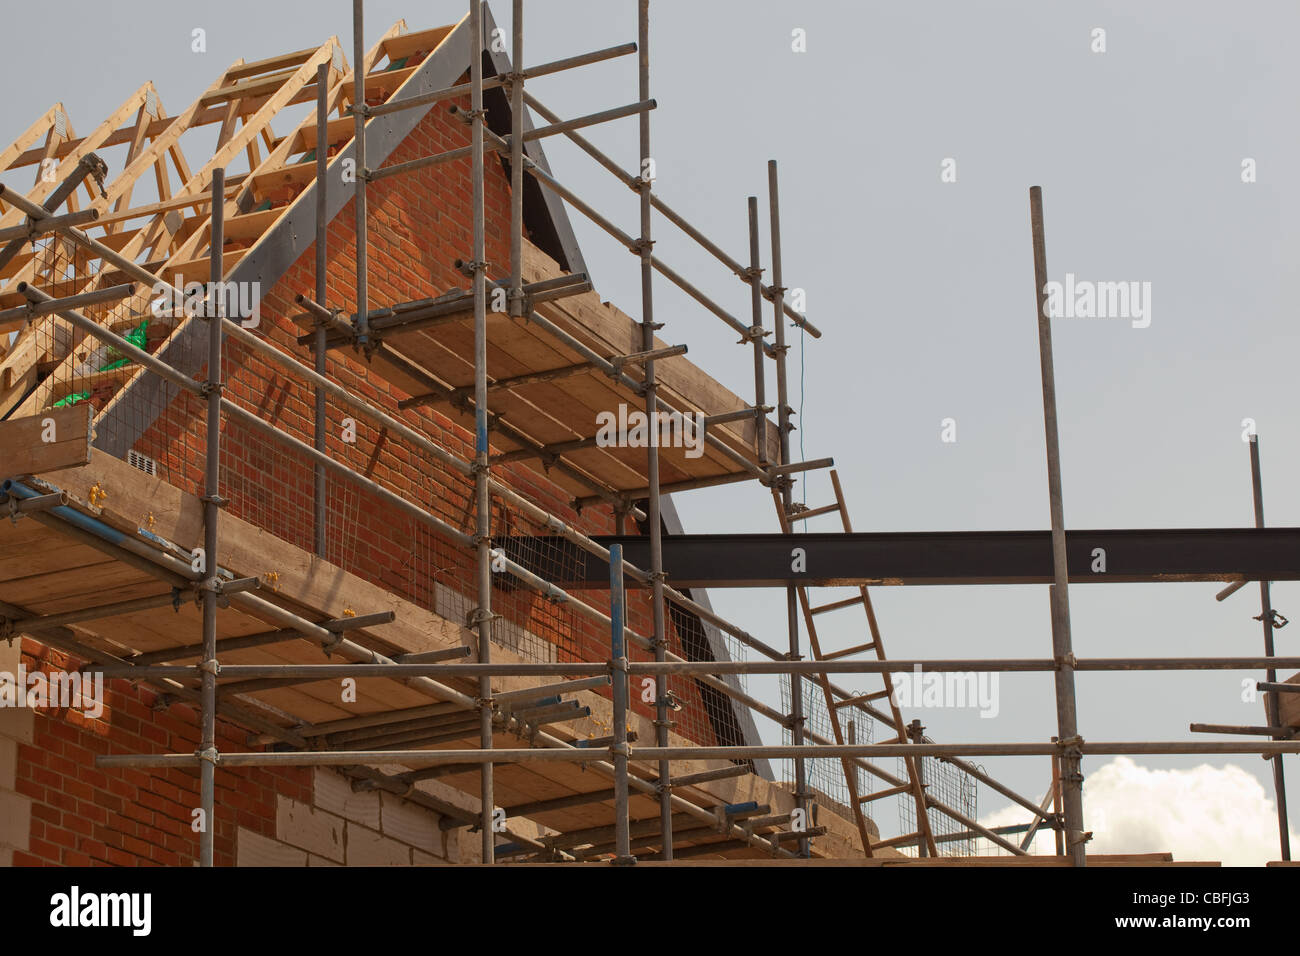 House Building Construction. Sprowston, Norwich. Norfolk. Stock Photo